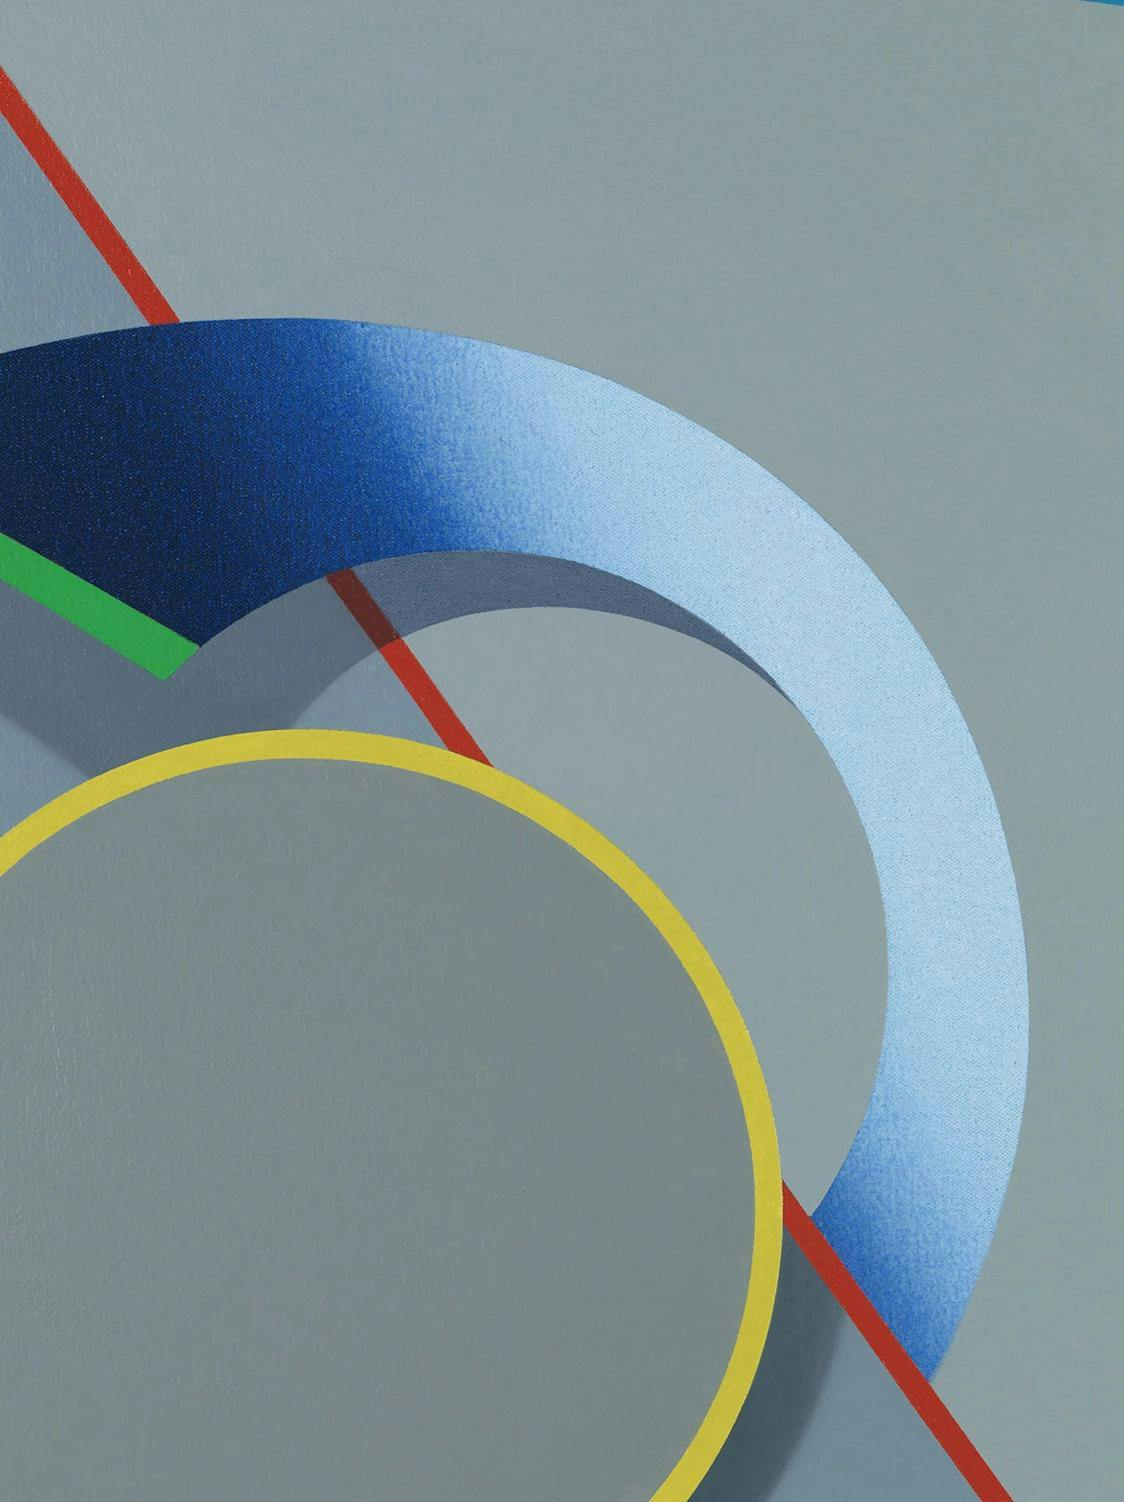 A work by Tomma Abts